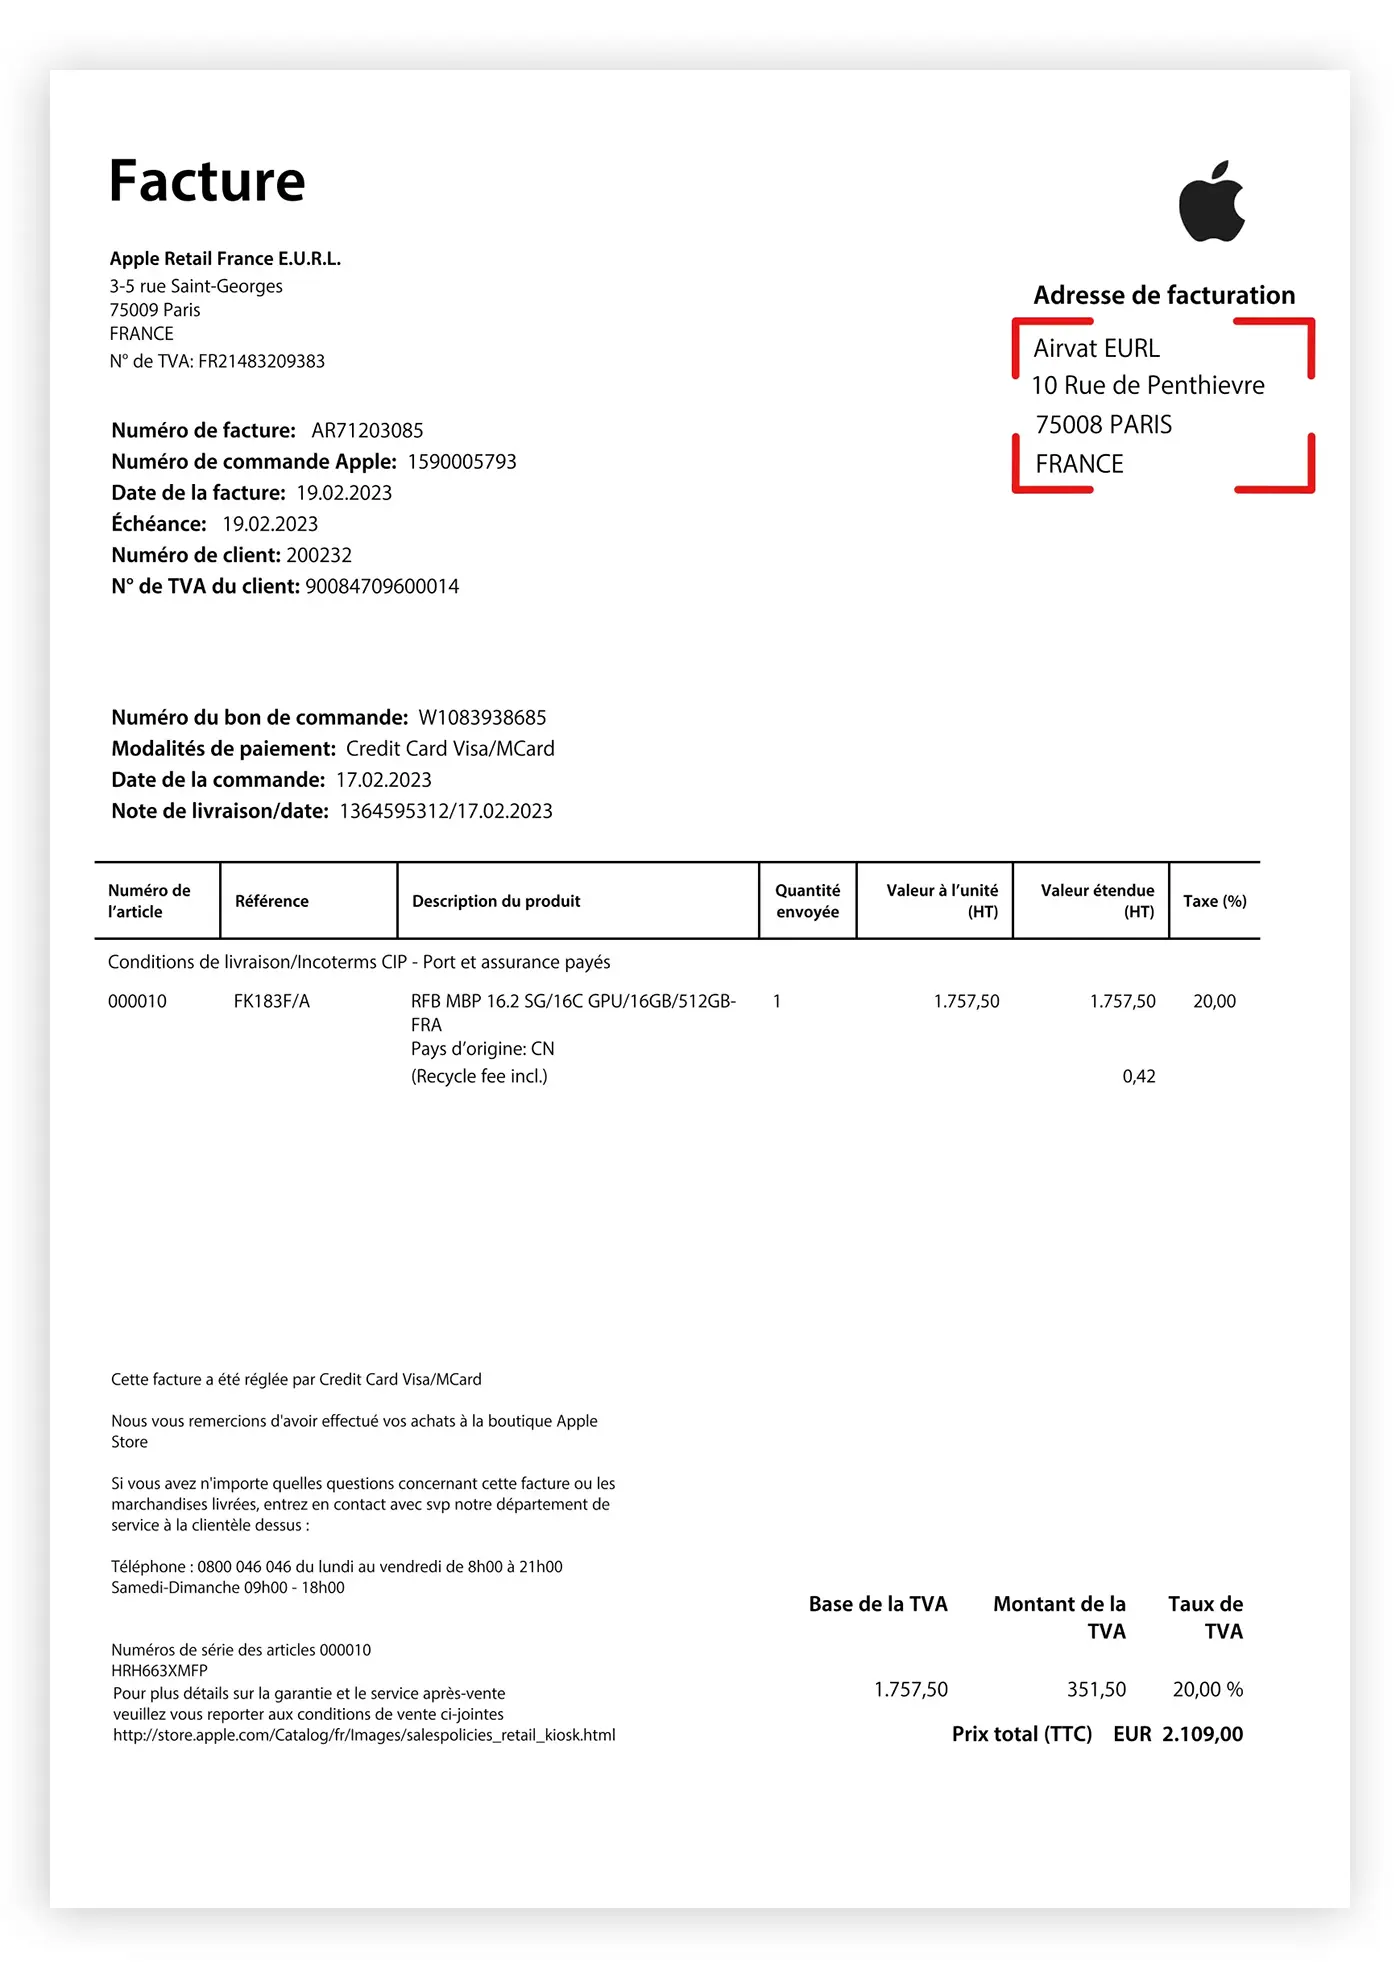 Example of an Apple tax-free invoice addressed to Airvat